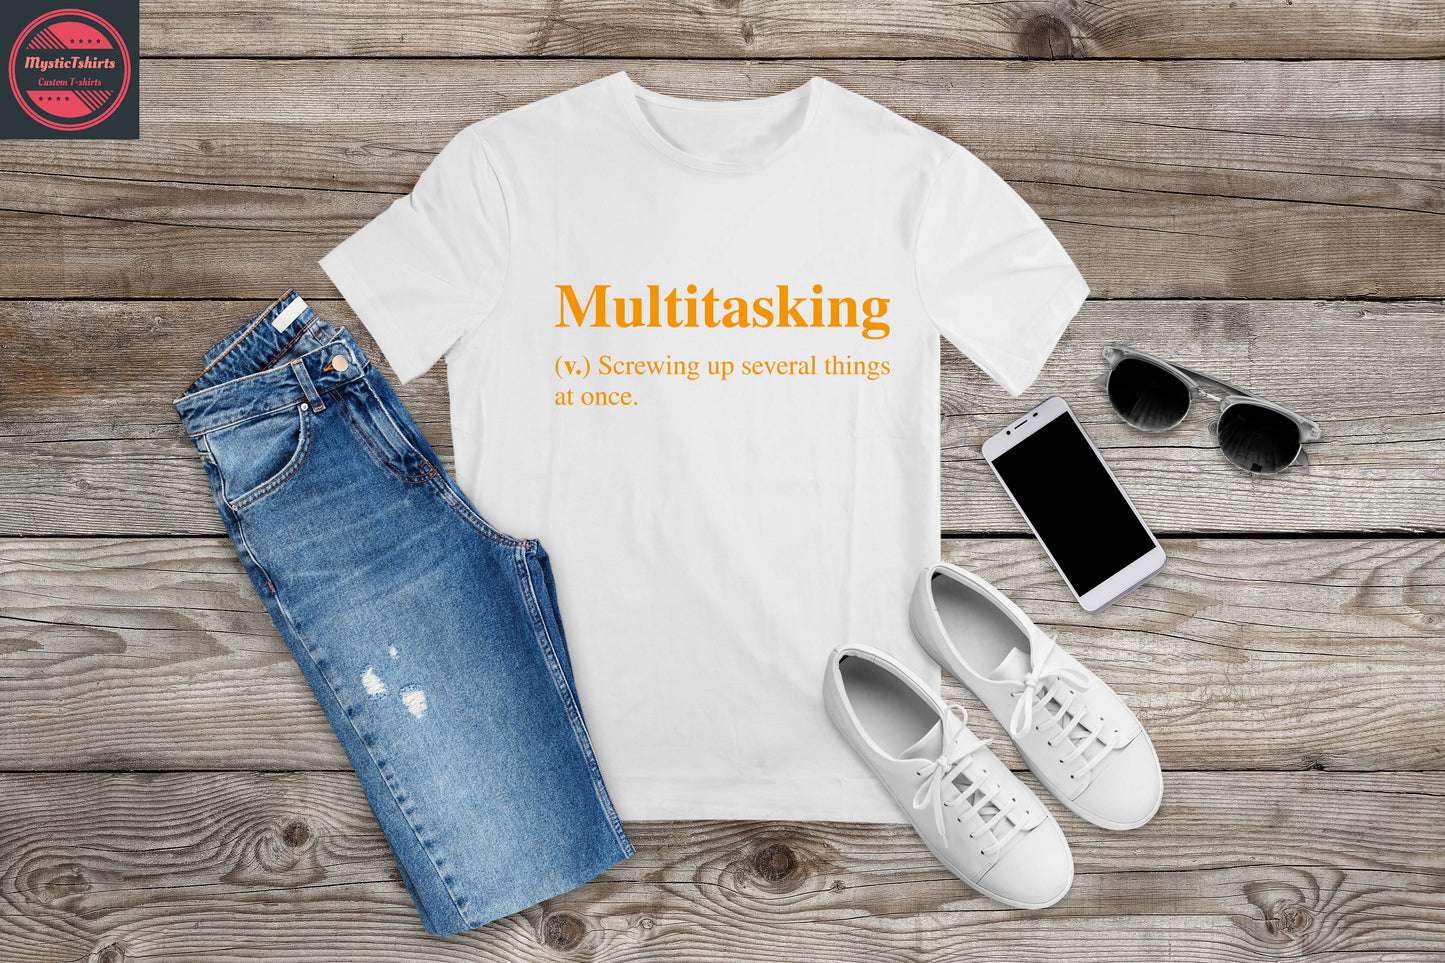 374. MULTITASKING SCREWING UP SEVERAL THINGS AT ONCE, Custom Made Shirt, Personalized T-Shirt, Custom Text, Make Your Own Shirt, Custom Tee